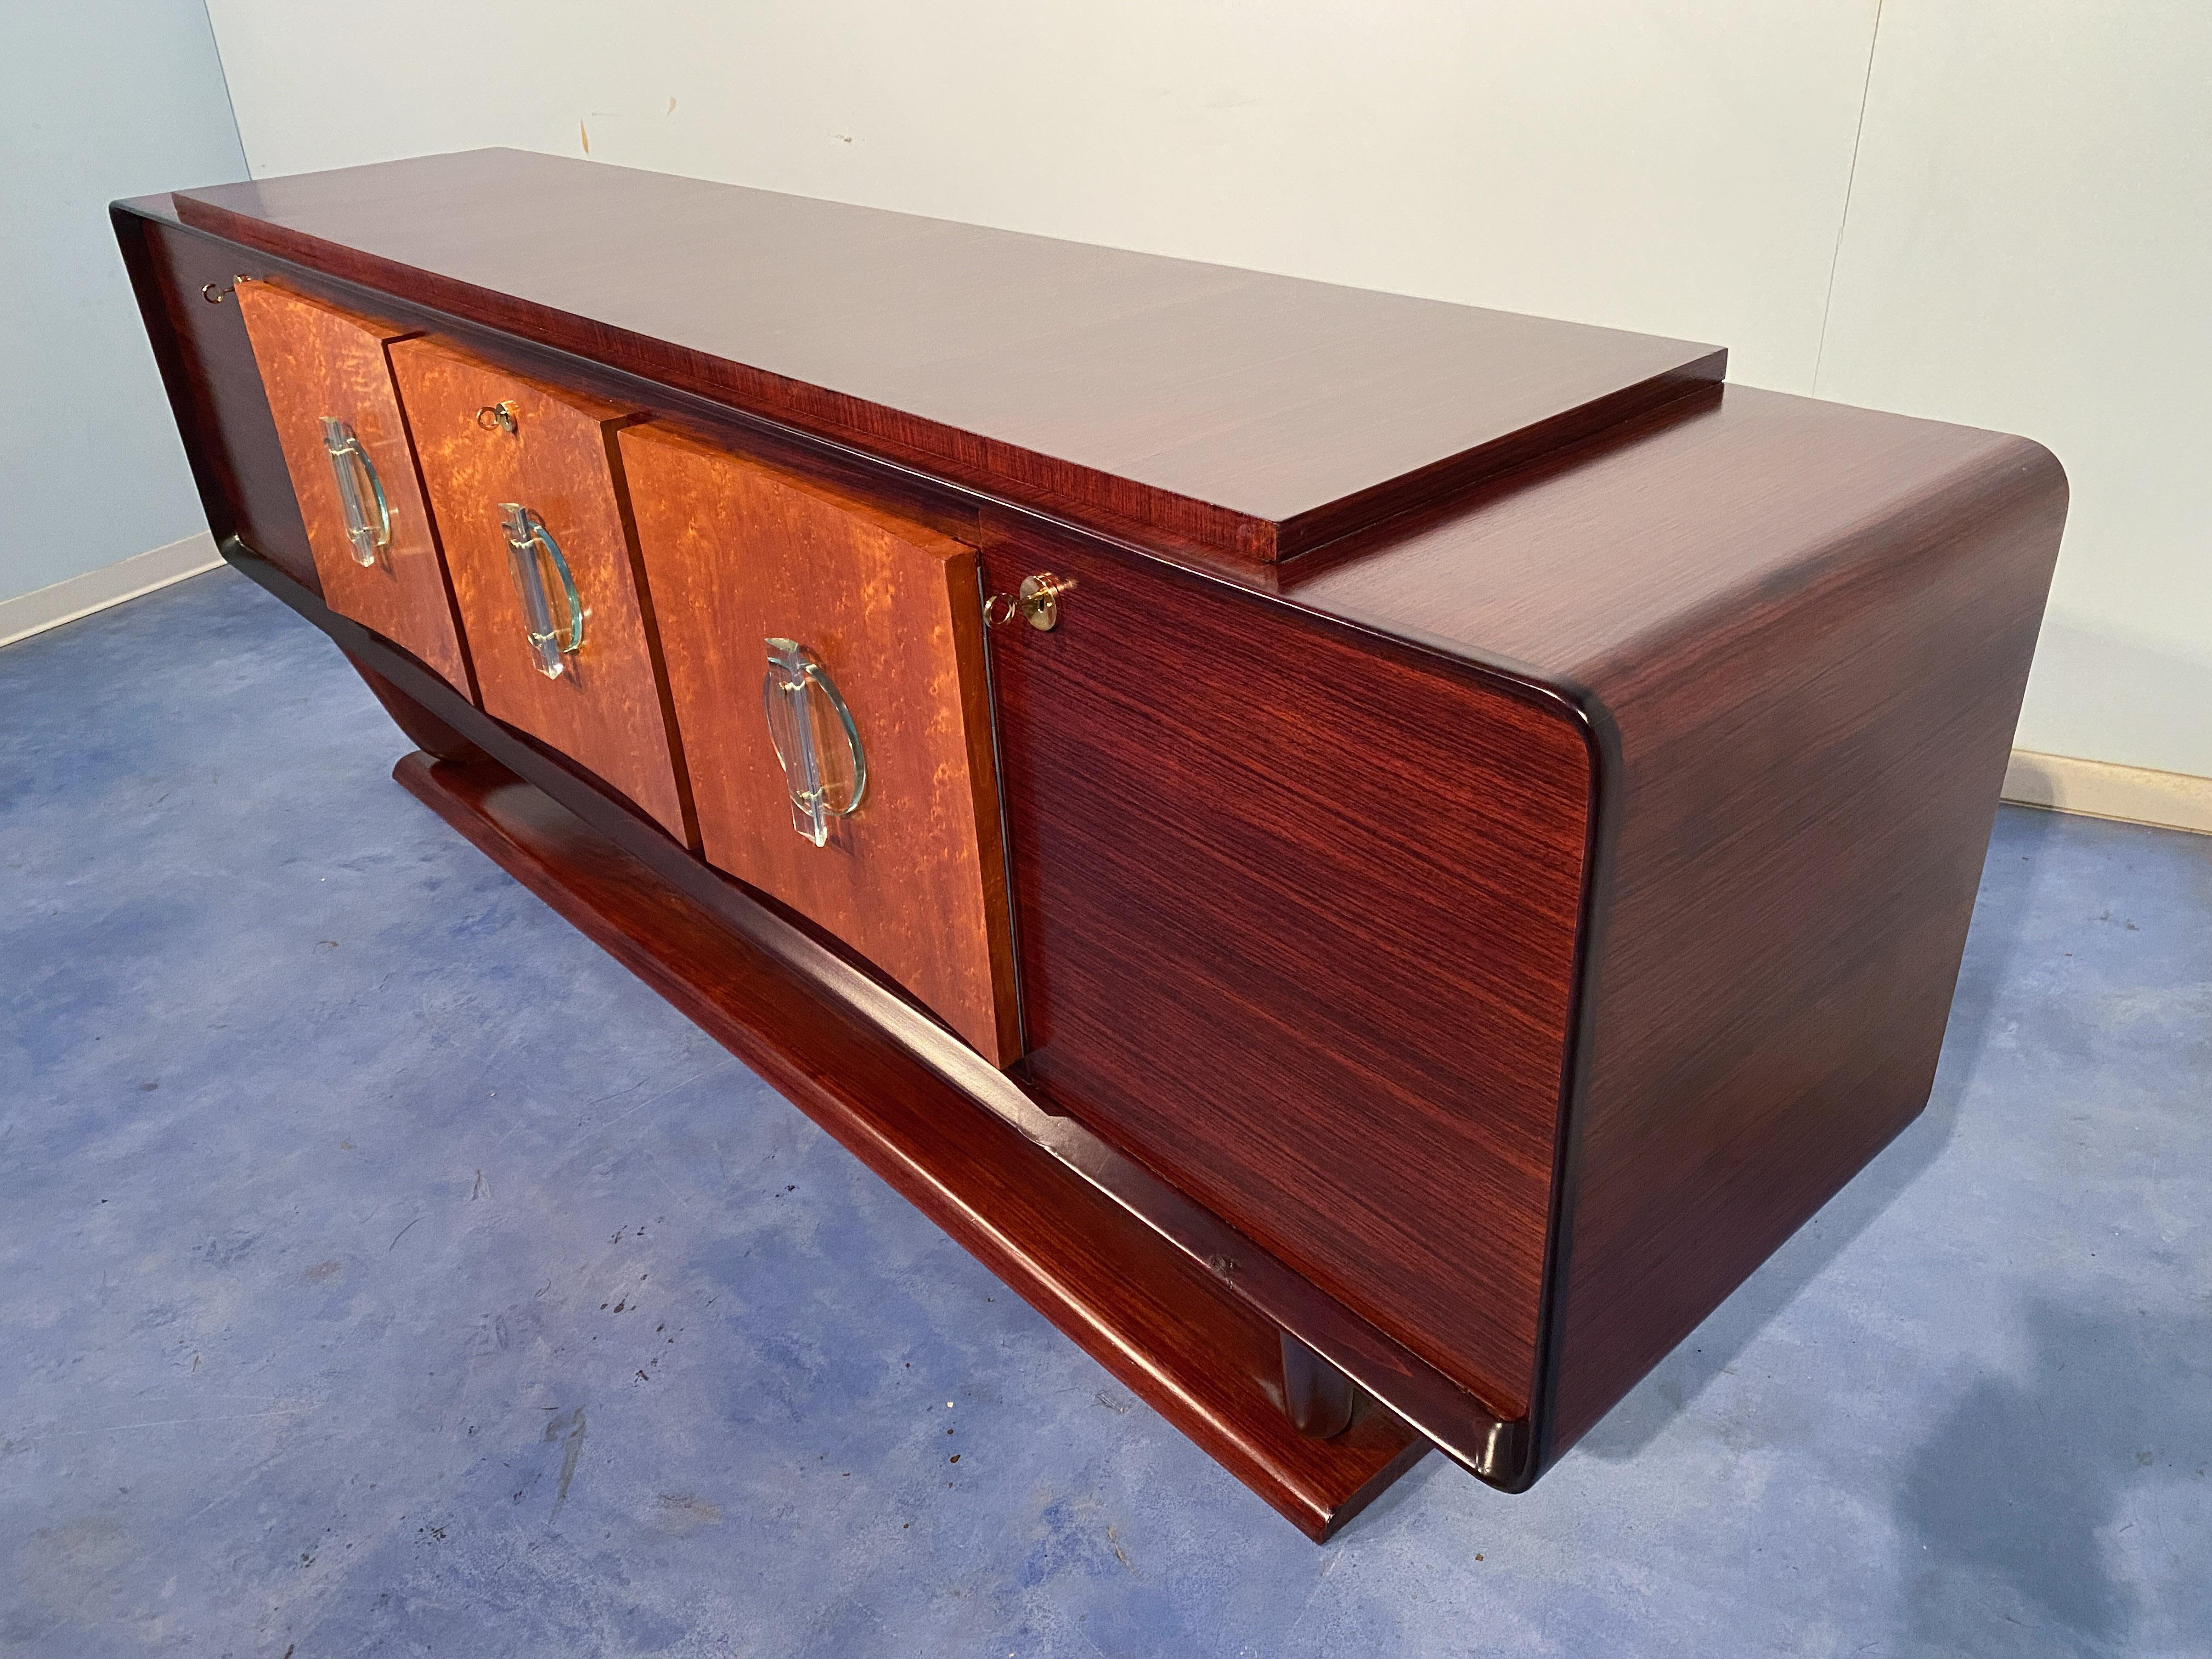 Italian Art Deco Sideboard with Bar Cabinet Attributed to Osvaldo Borsani, 1940s For Sale 14